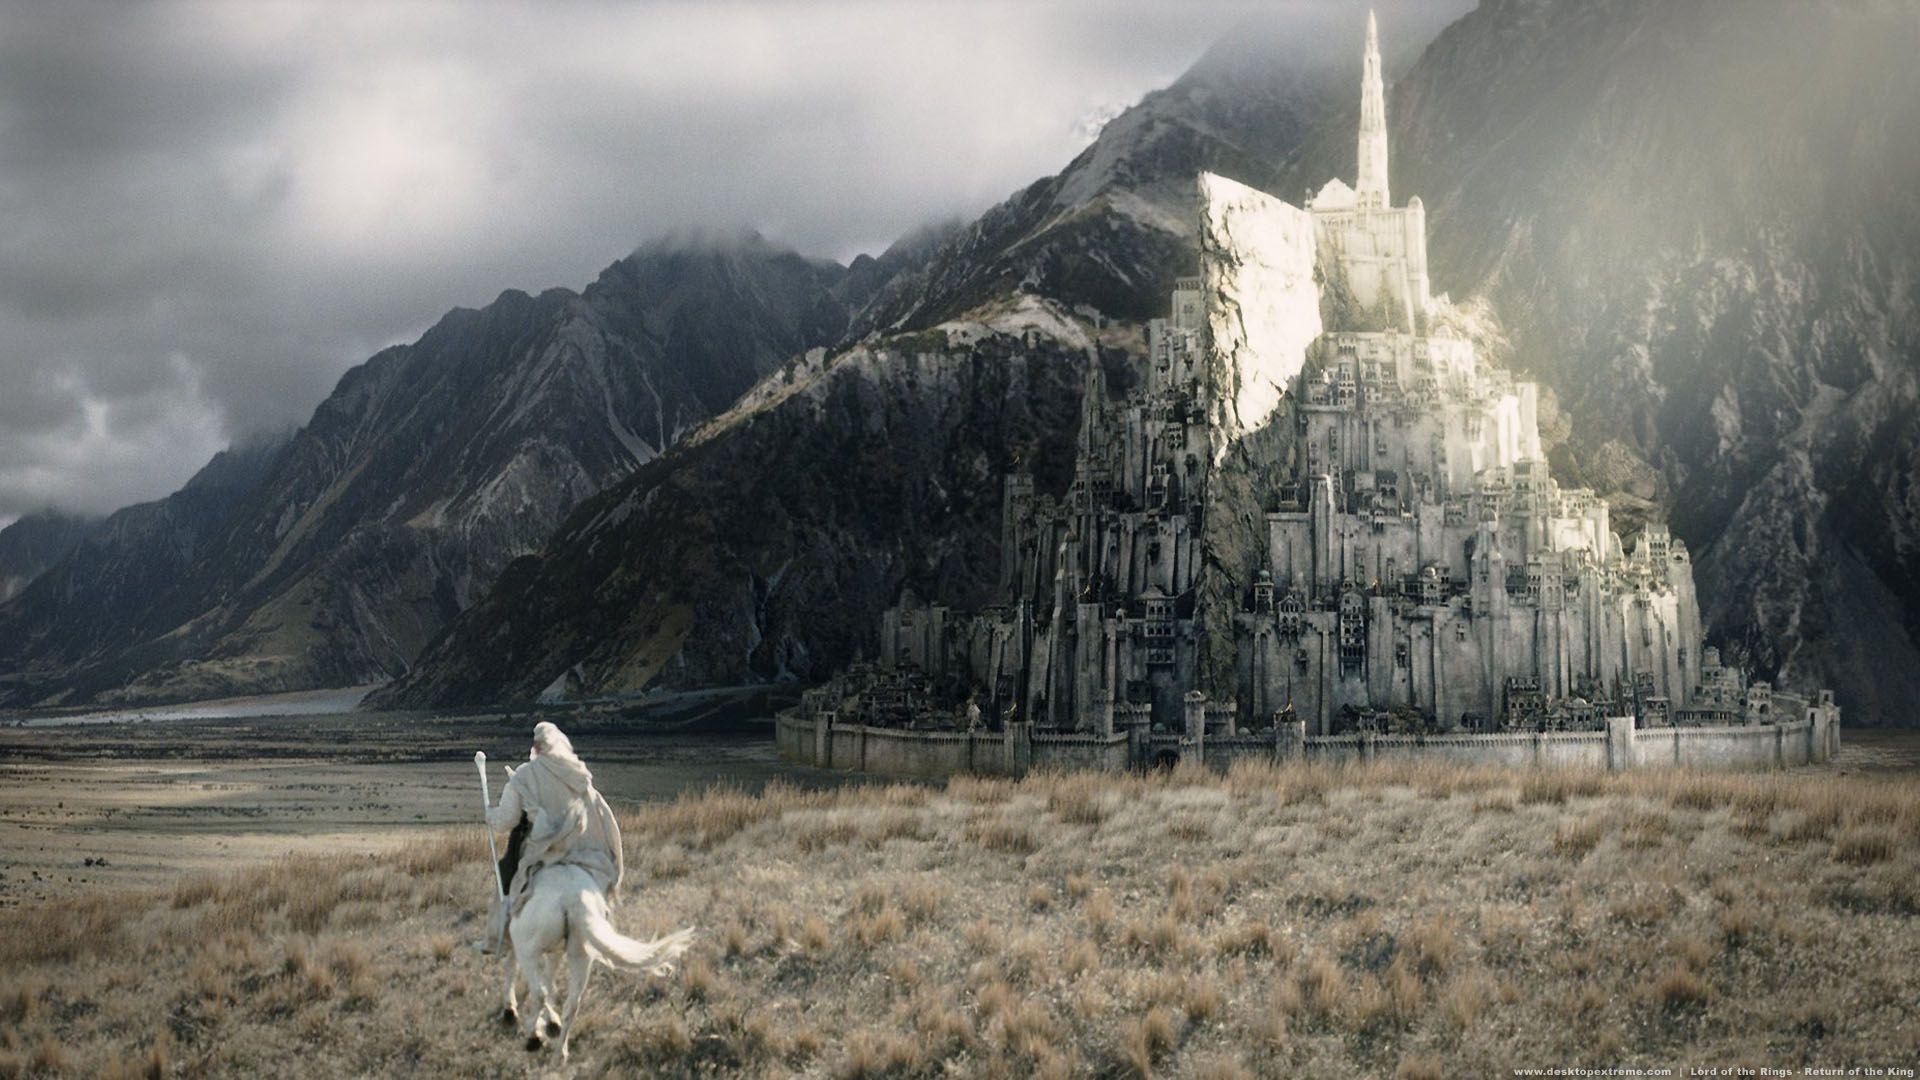 Gondor. The One Wiki to Rule Them All